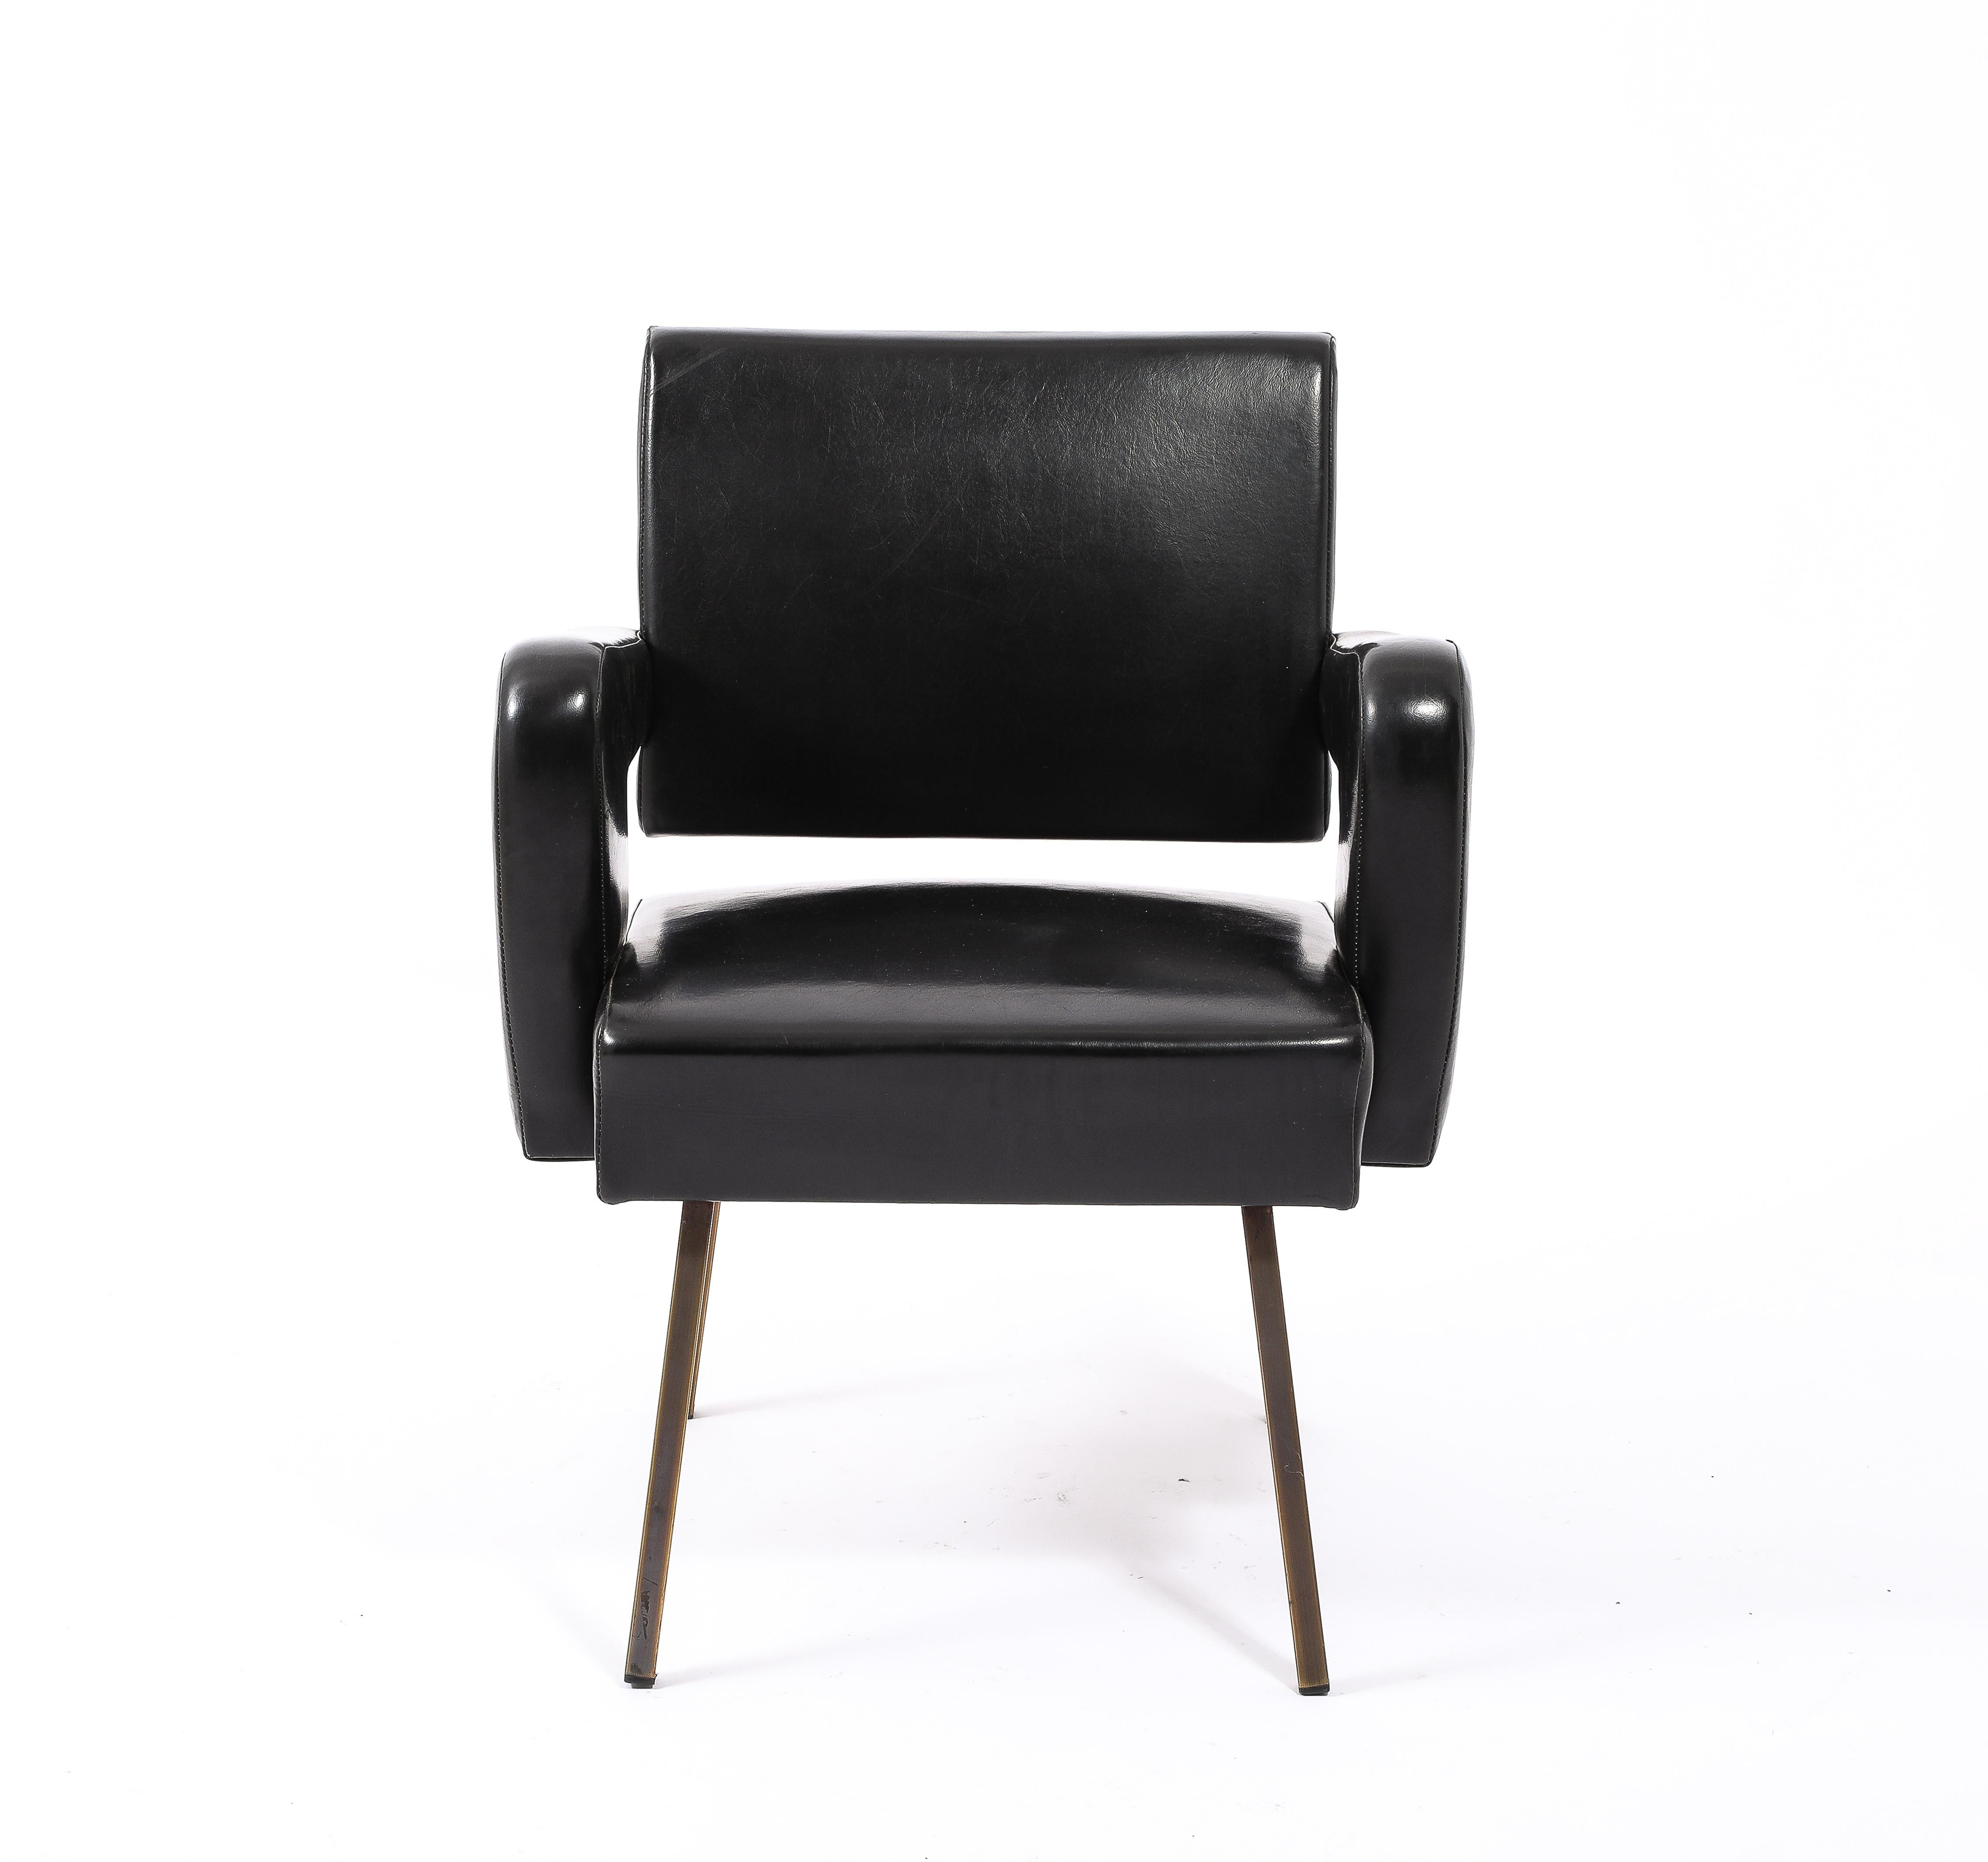 President armchairs by Jacques Adnet, in their original Vinyl on brass legs.
Sold in pairs.
